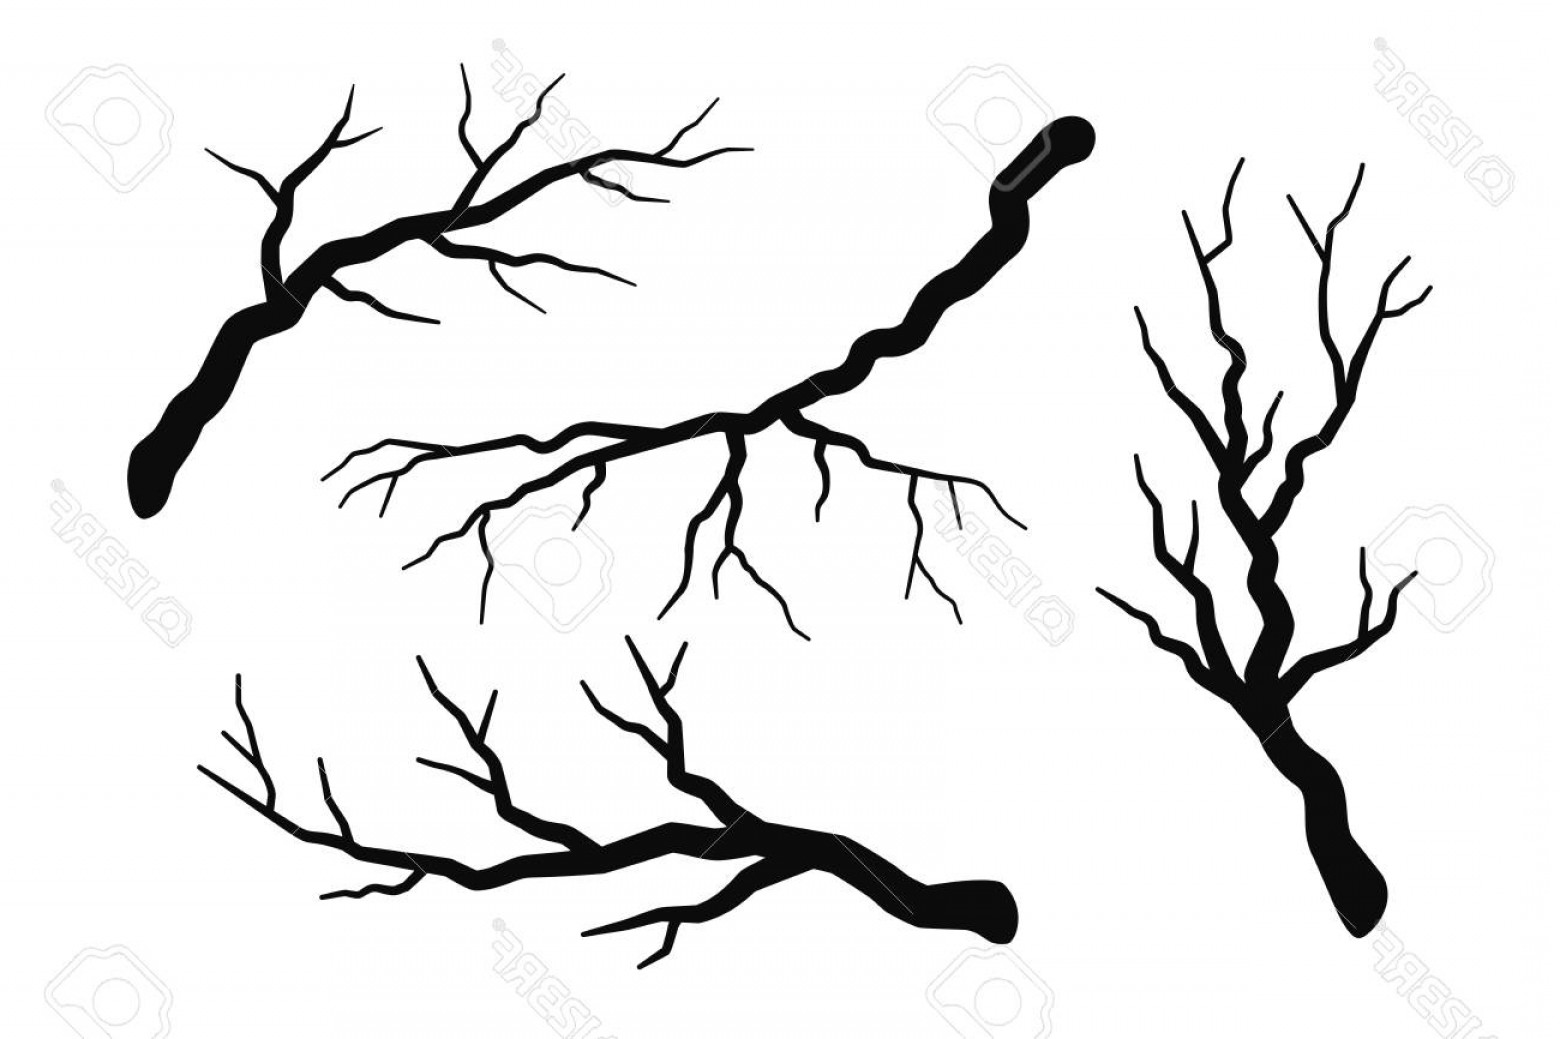 Photostock Vector Tree Branch Without Leaves Silhouettes Set